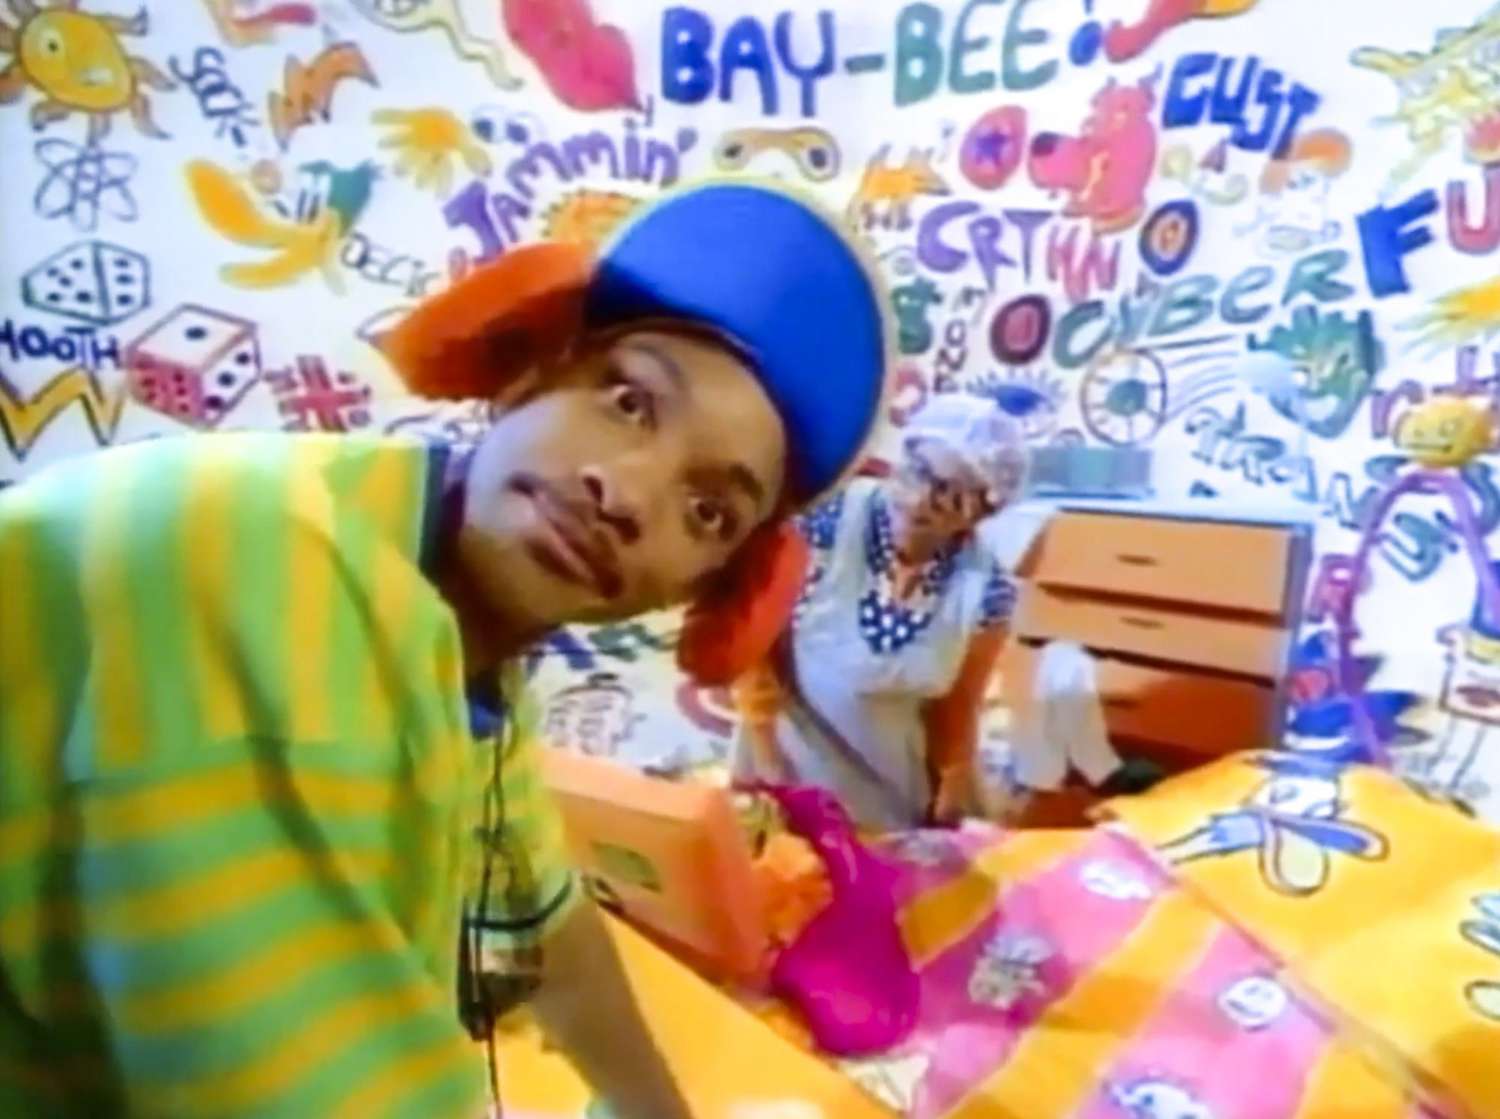 The Fresh Prince of Bel-Air (1990–1996)